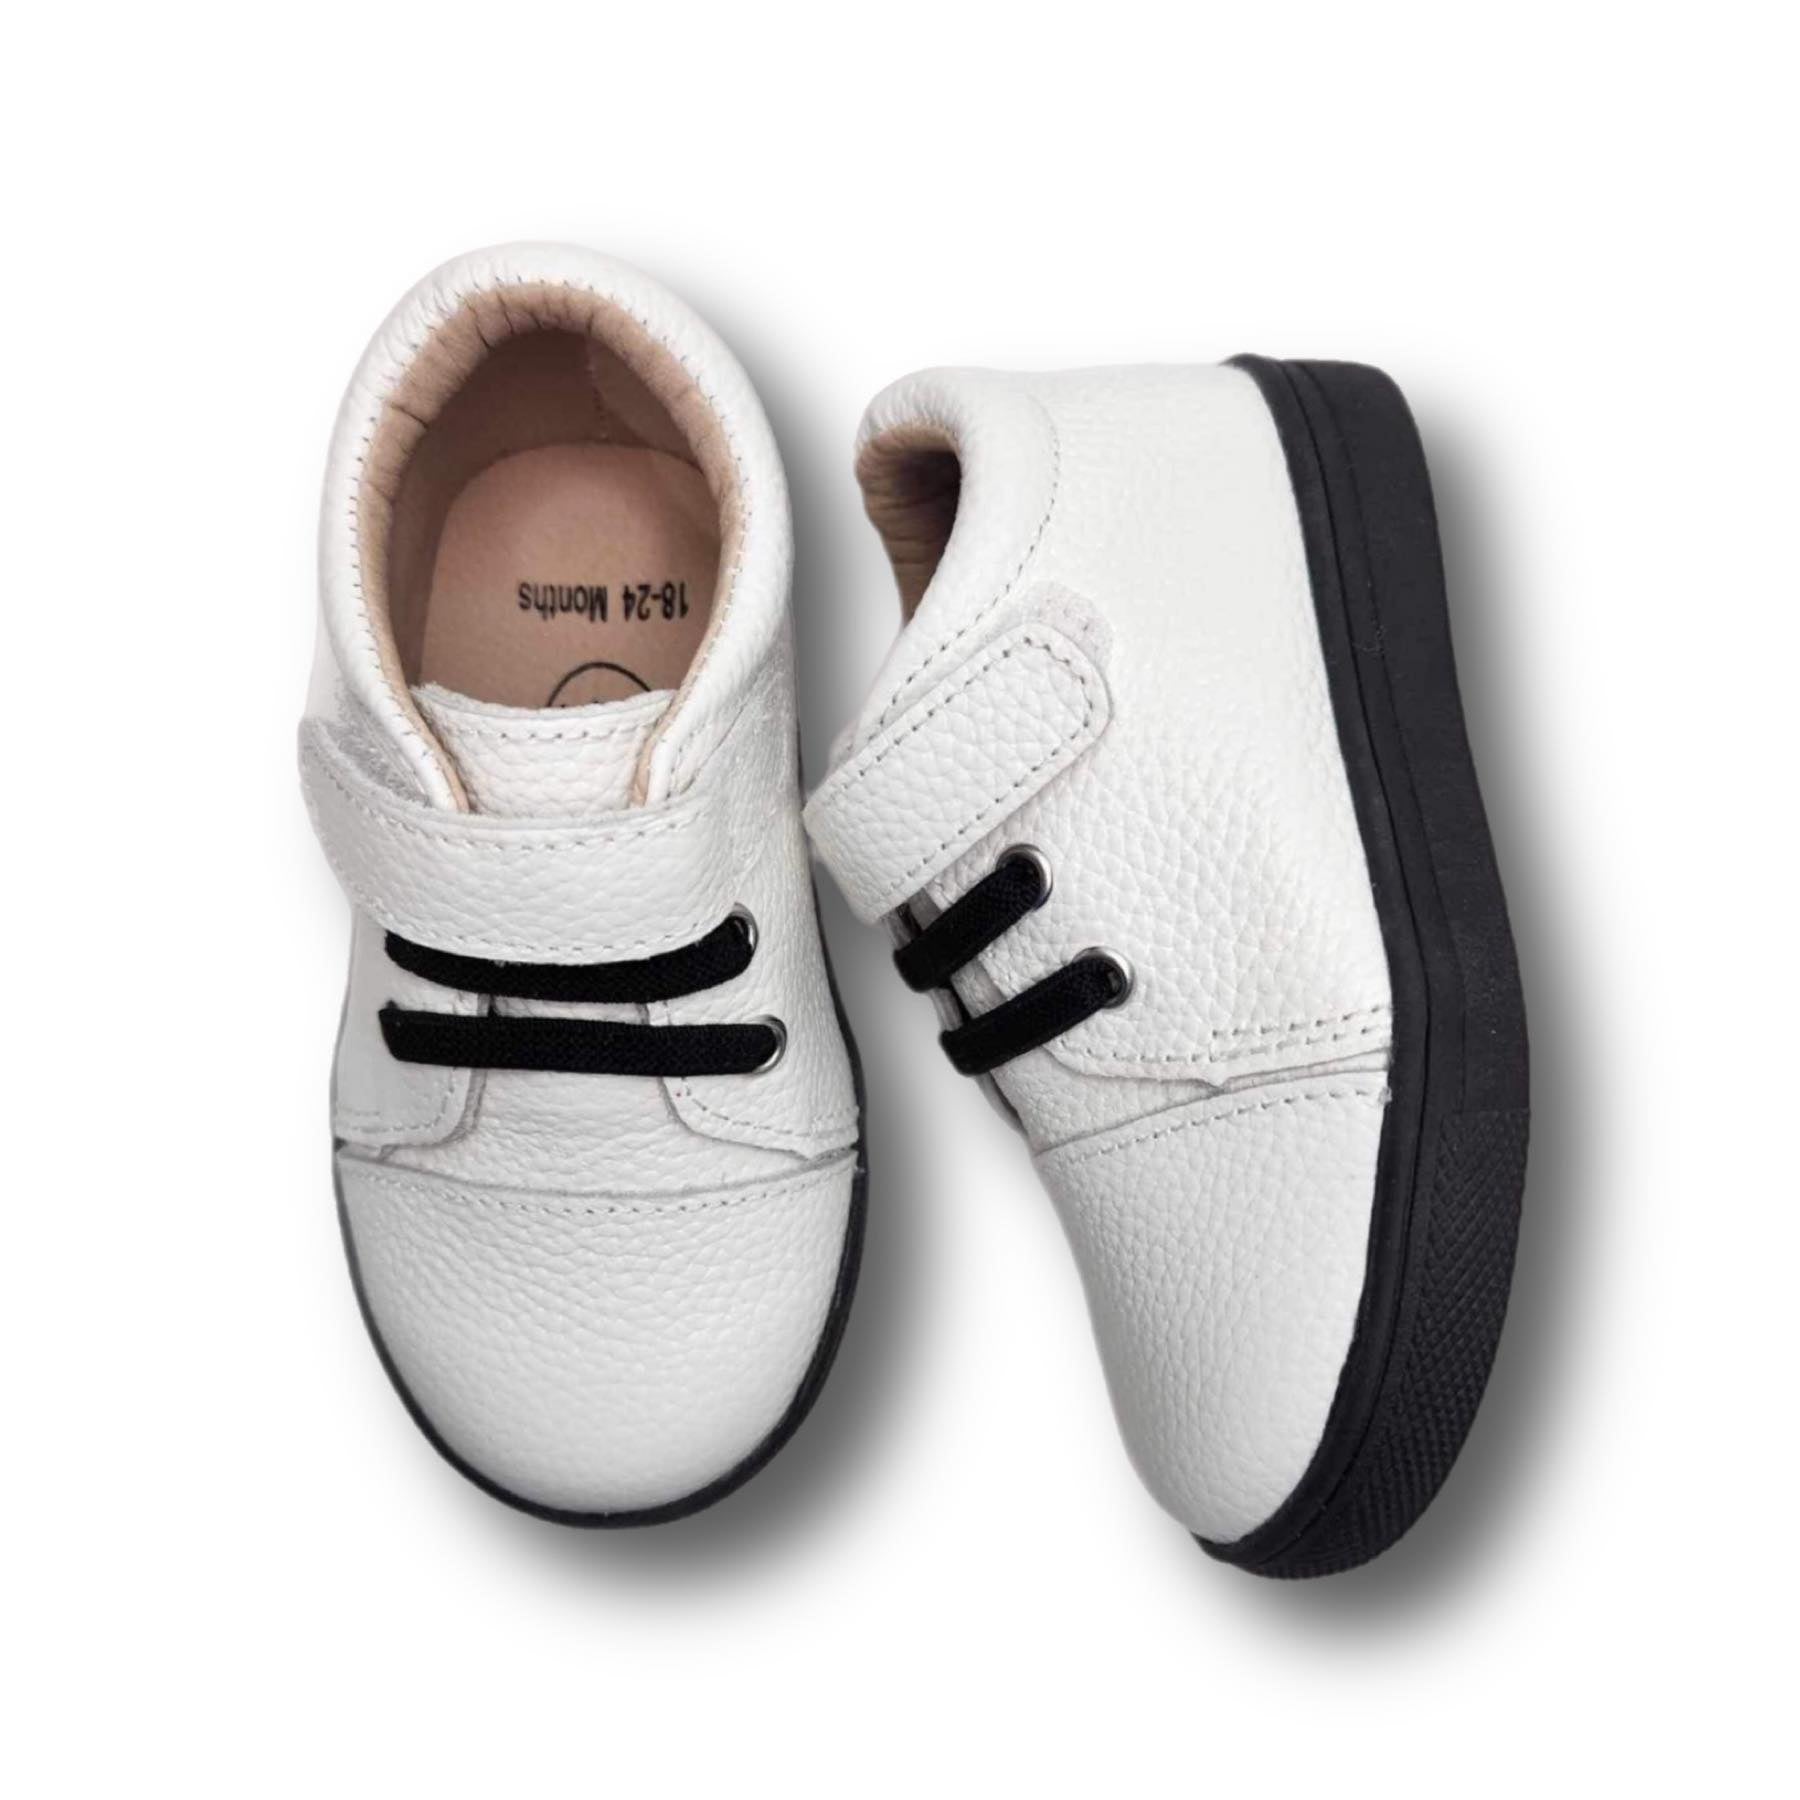 SAWYER Children's Low-Top Sneaker in White Leather and Black Accents